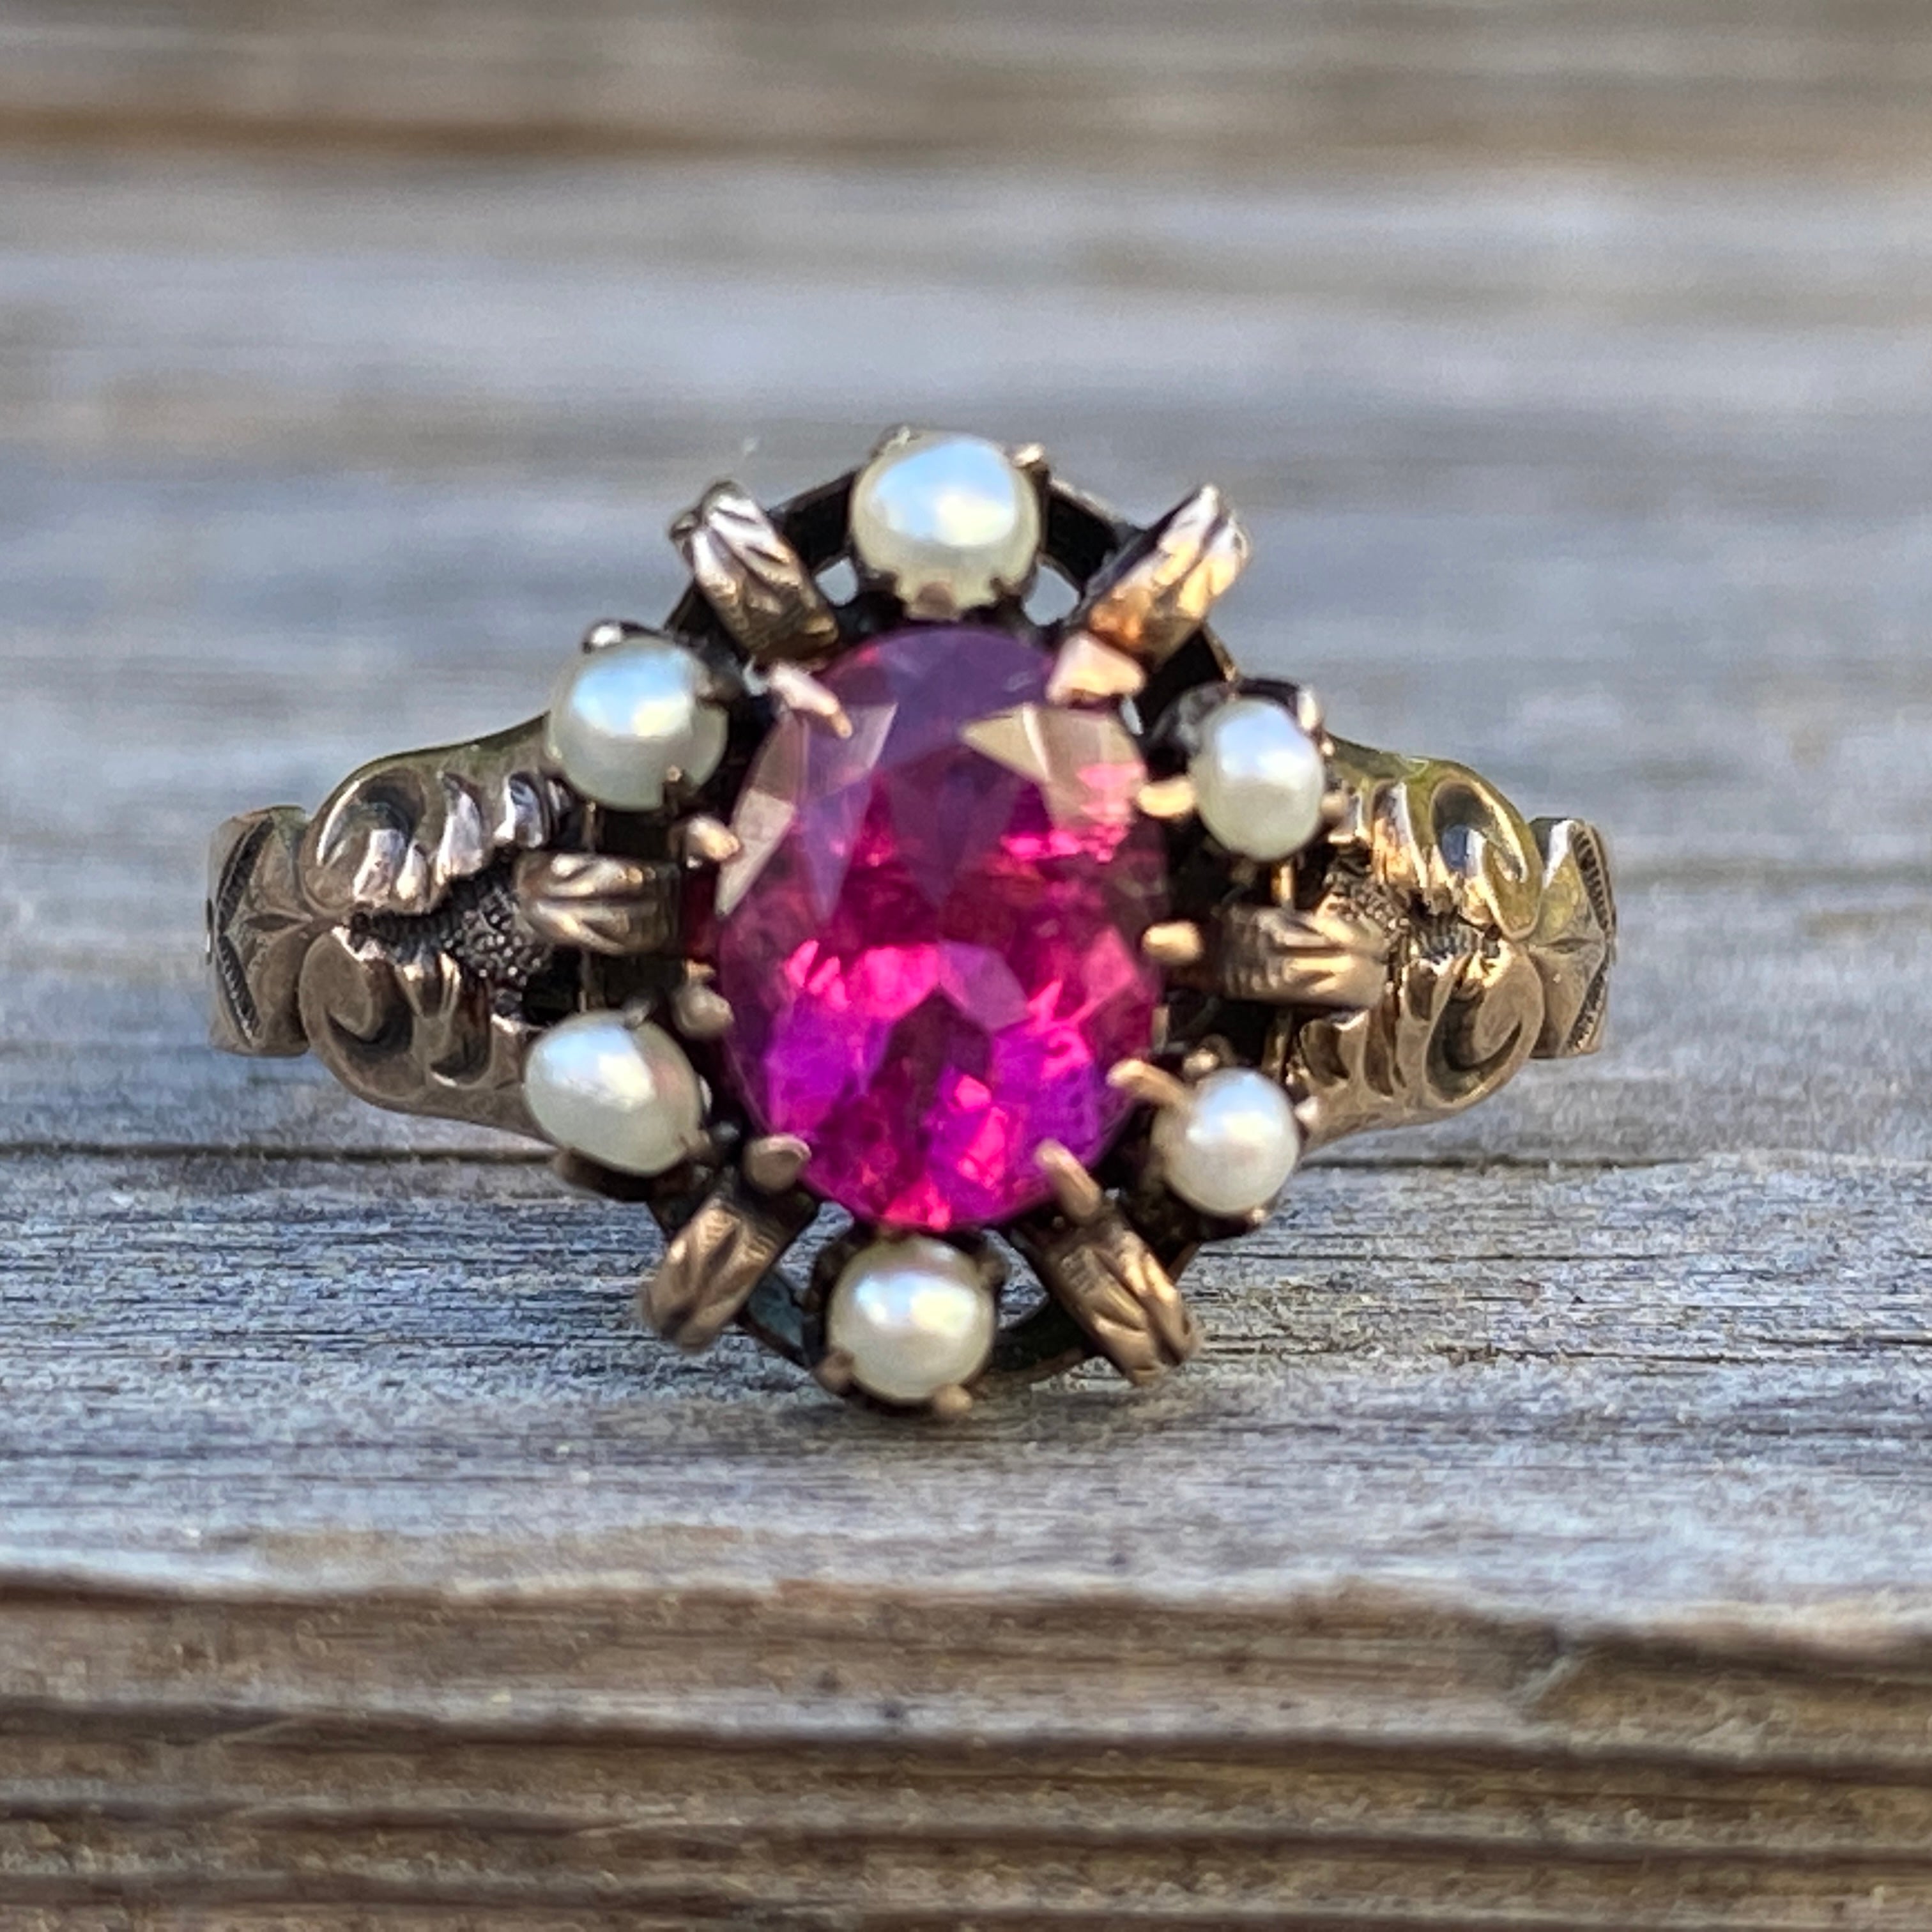 Details:
Sweet Pink Tourmaline and seed pearls set in 14K yellow gold. The tourmaline is a vibrant rich pink color. The Victorian setting has a sweet scroll pattern on the shoulders and a lovely claw setting. This sweet ring has engraving with the